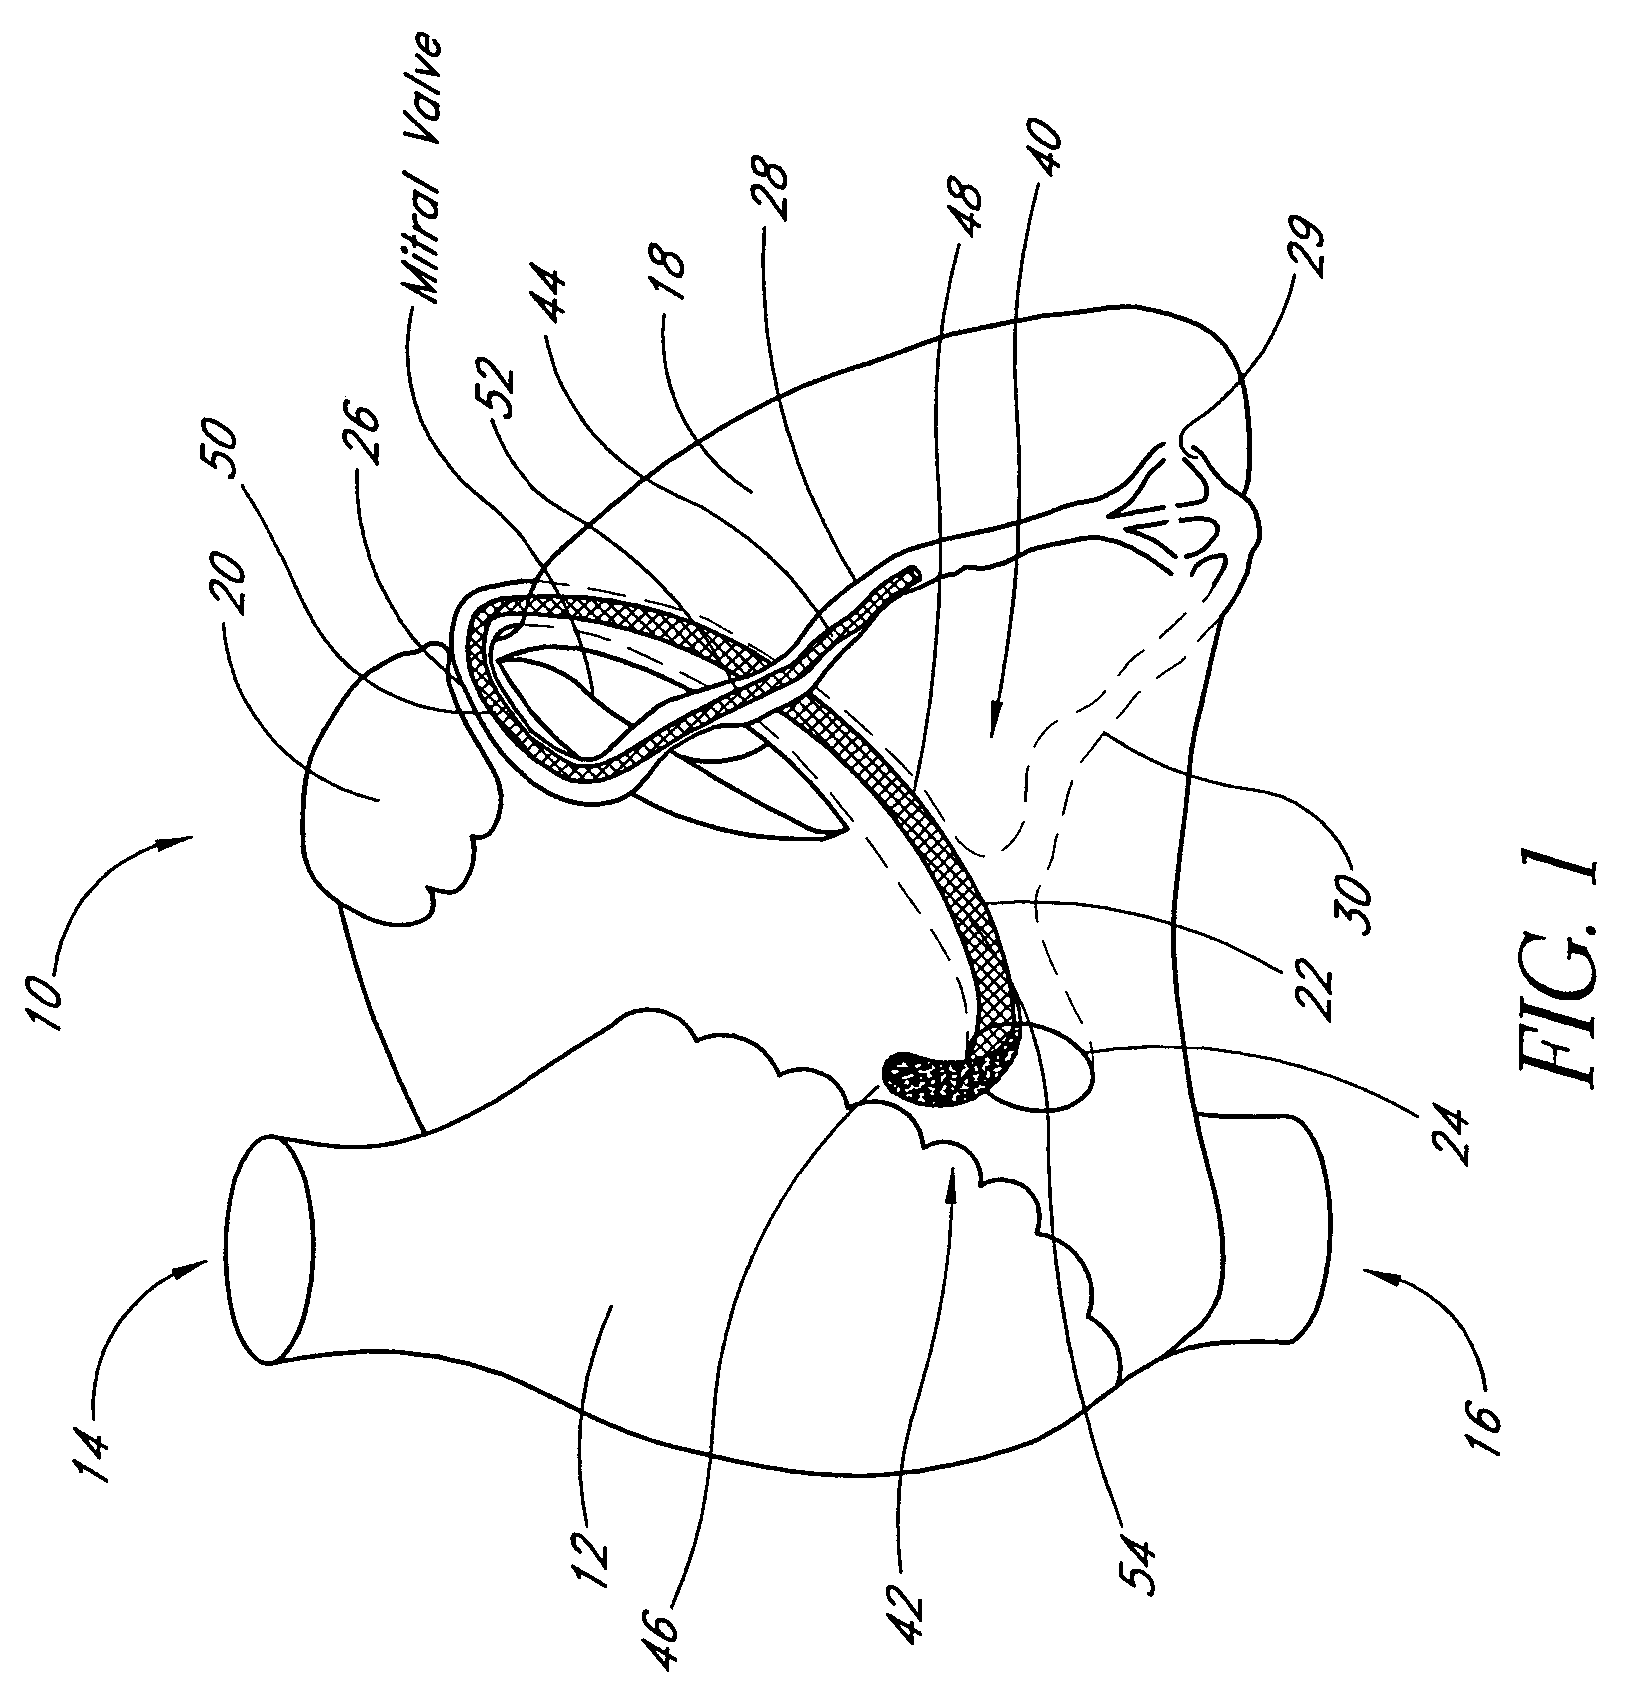 Transluminal mitral annuloplasty with active anchoring